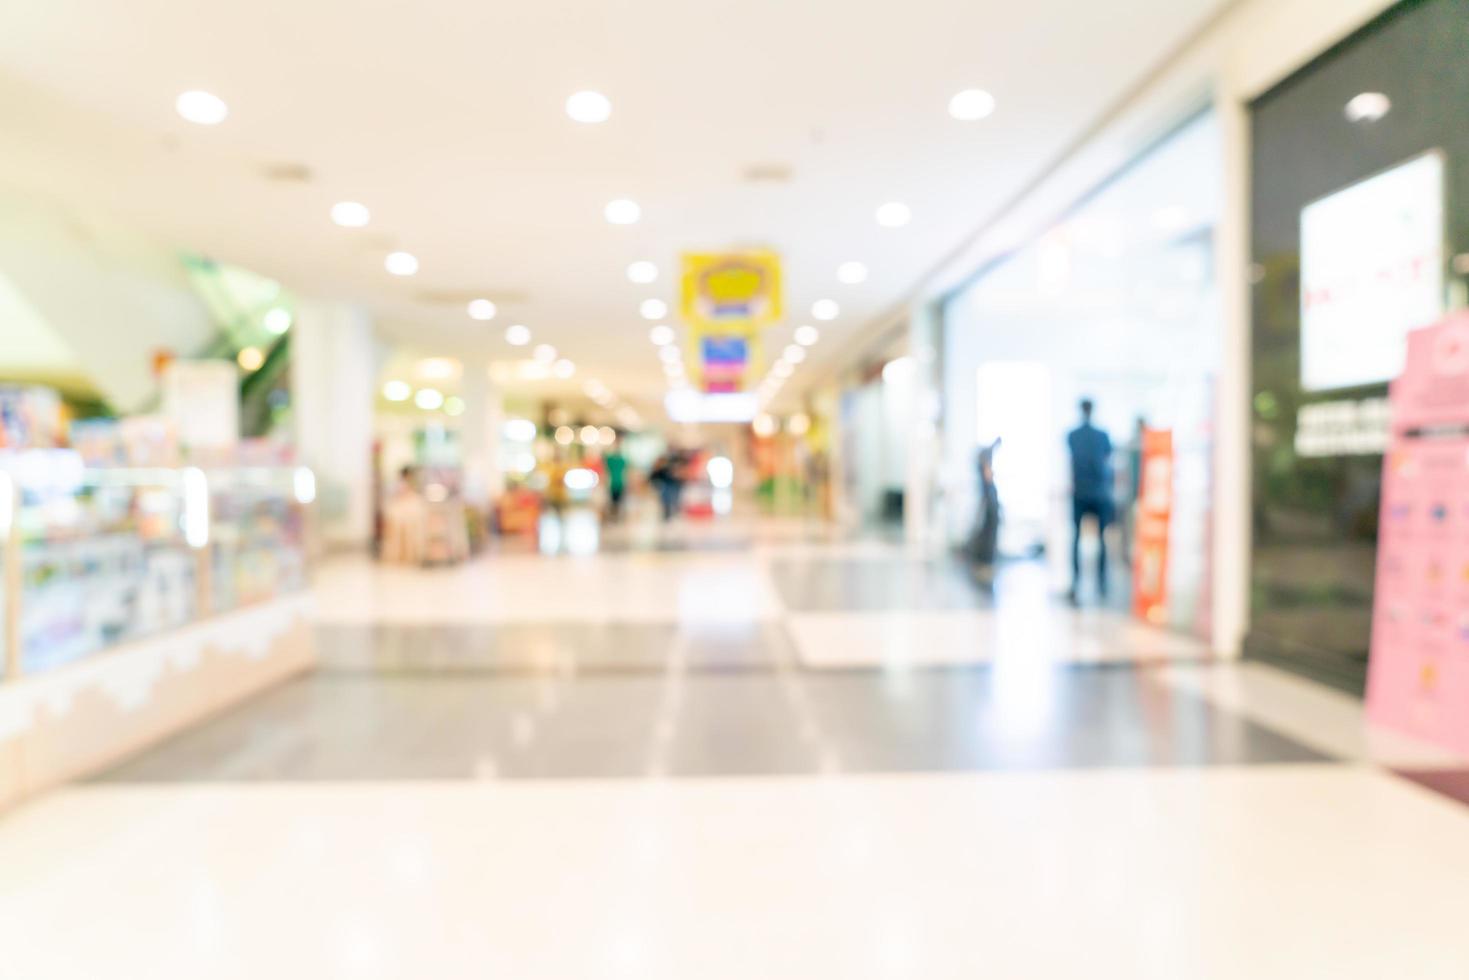 Abstract blur shop and retail store in shopping mall for background photo